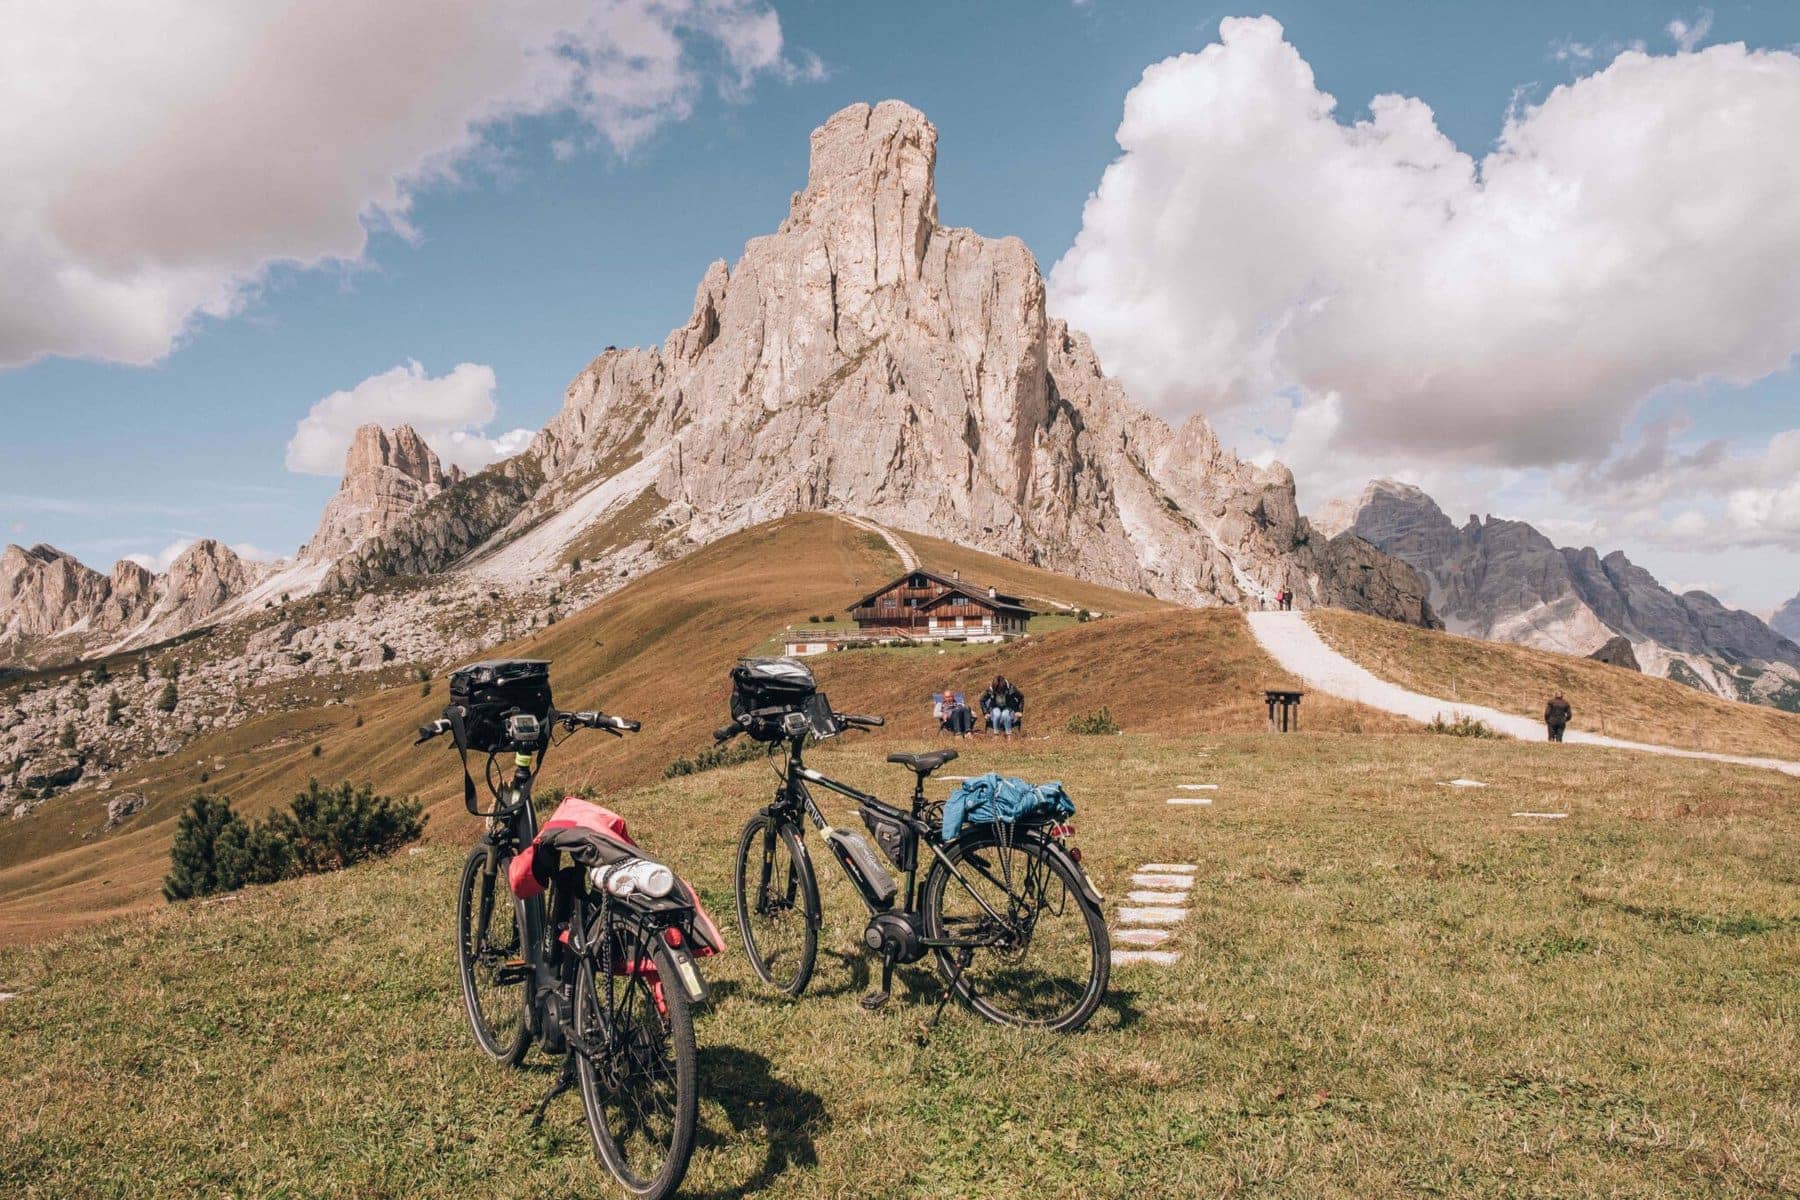 Passo Giau is a beautiful place in the Italian Dolomites. You can also find electric bikes in the photo.